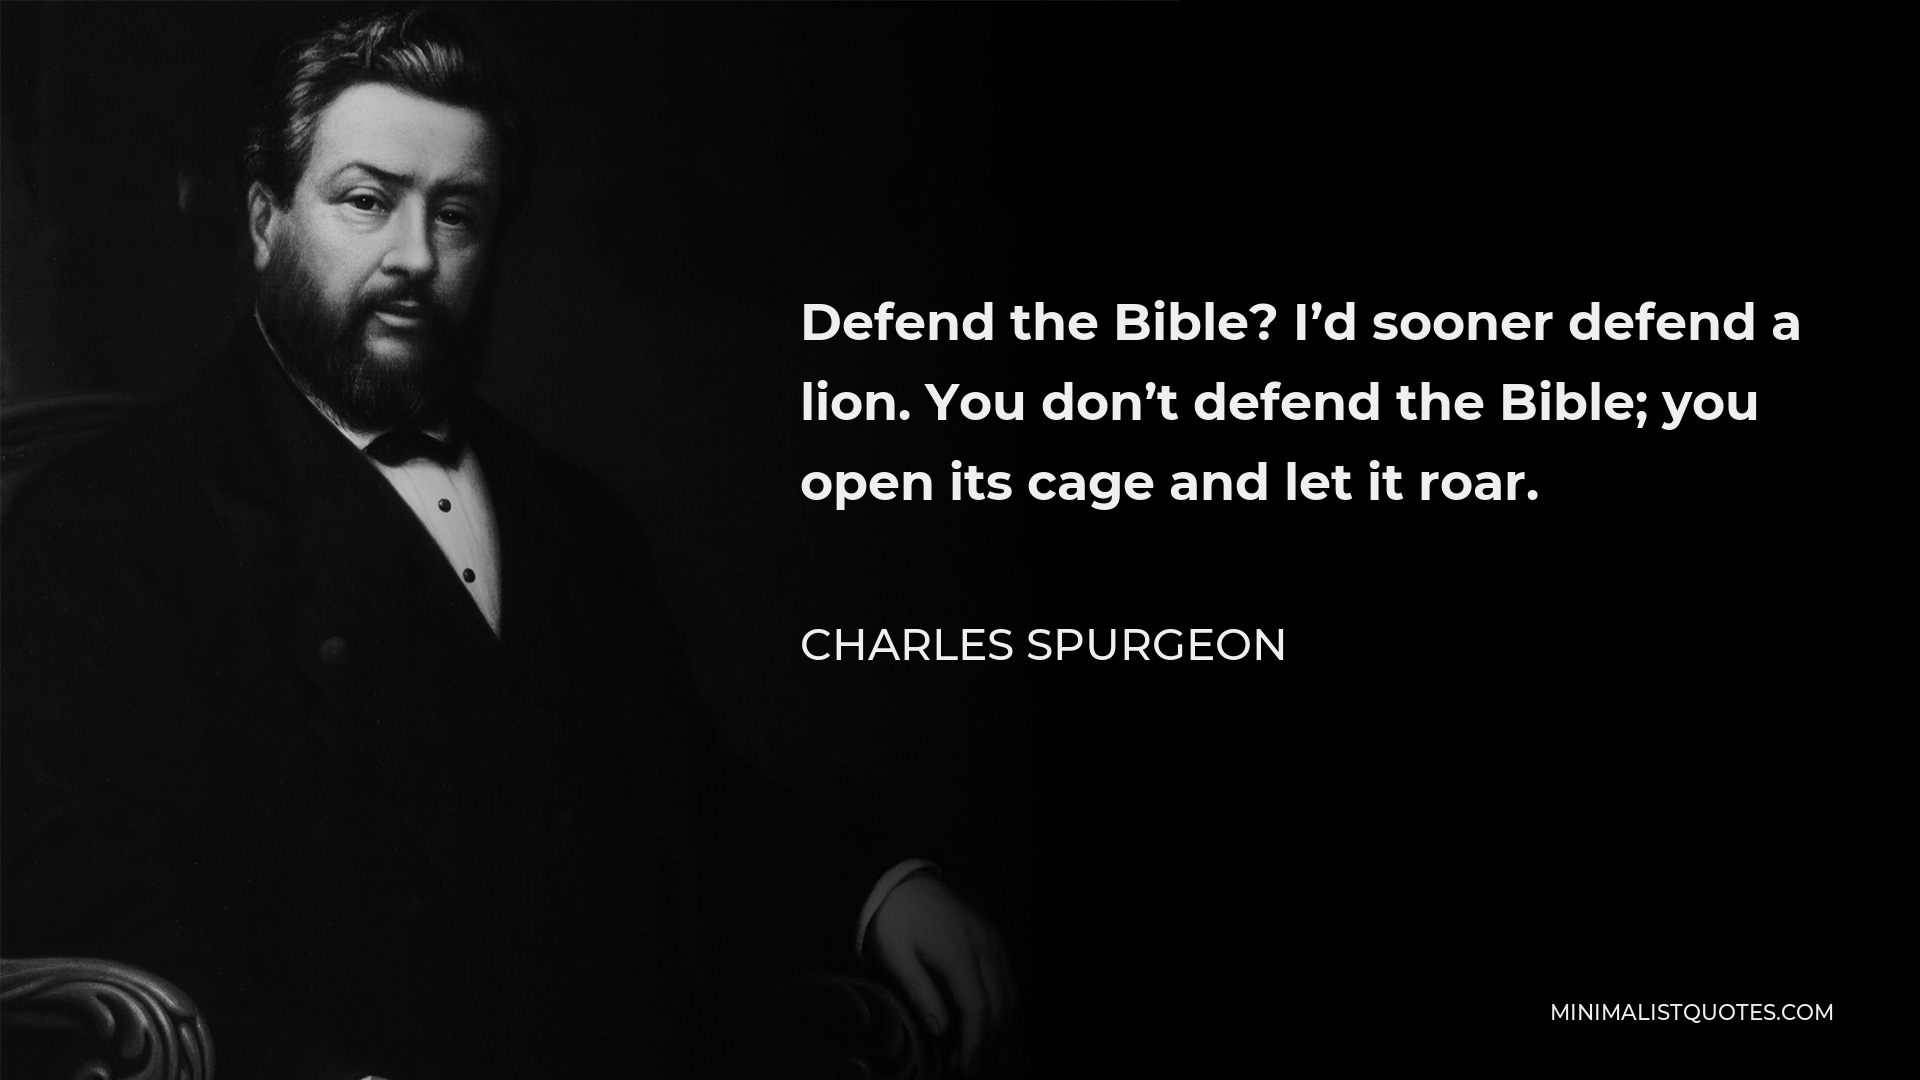 Charles Spurgeon Quote - Defend the Bible? I’d sooner defend a lion. You don’t defend the Bible; you open its cage and let it roar.